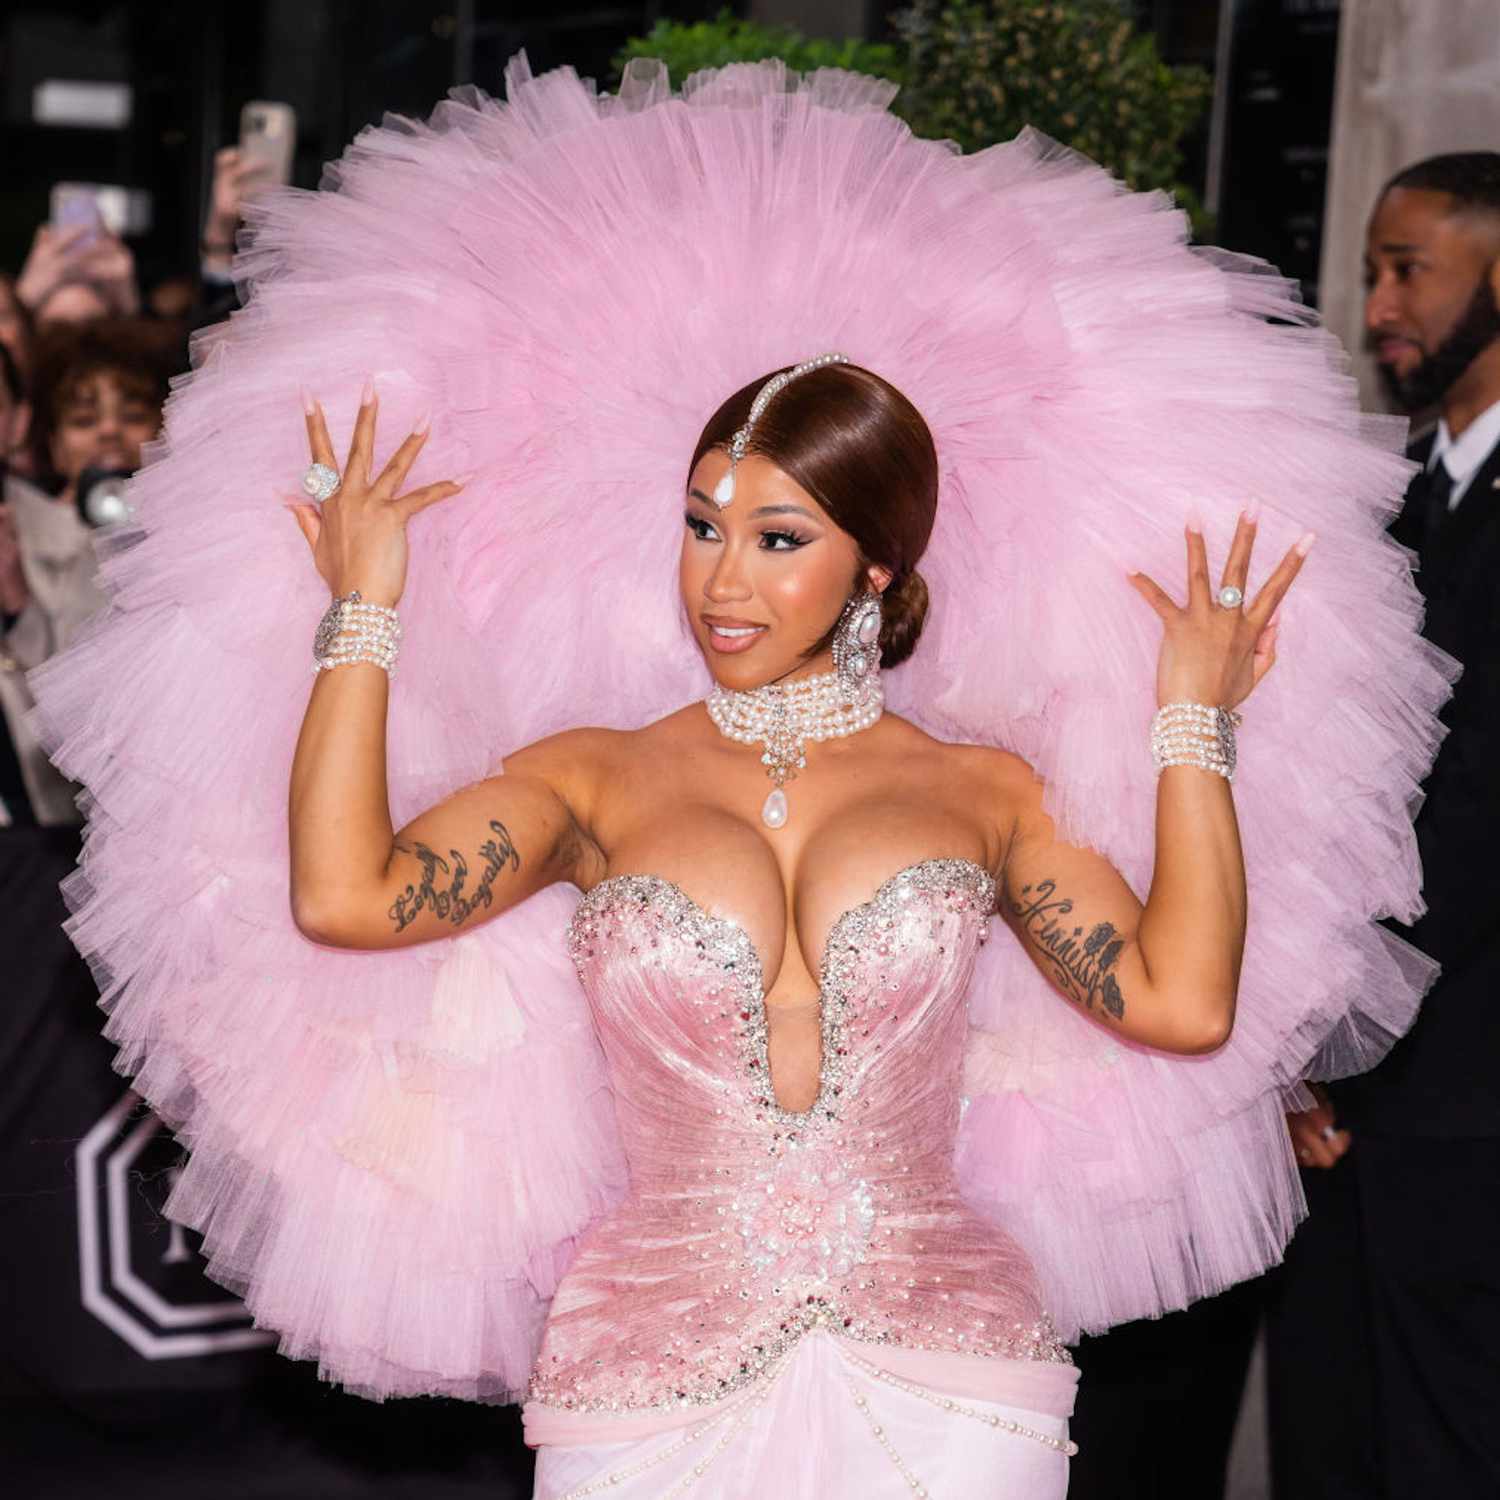 Cardi B with a sleek bun hairstyle, jewels down the center of her part